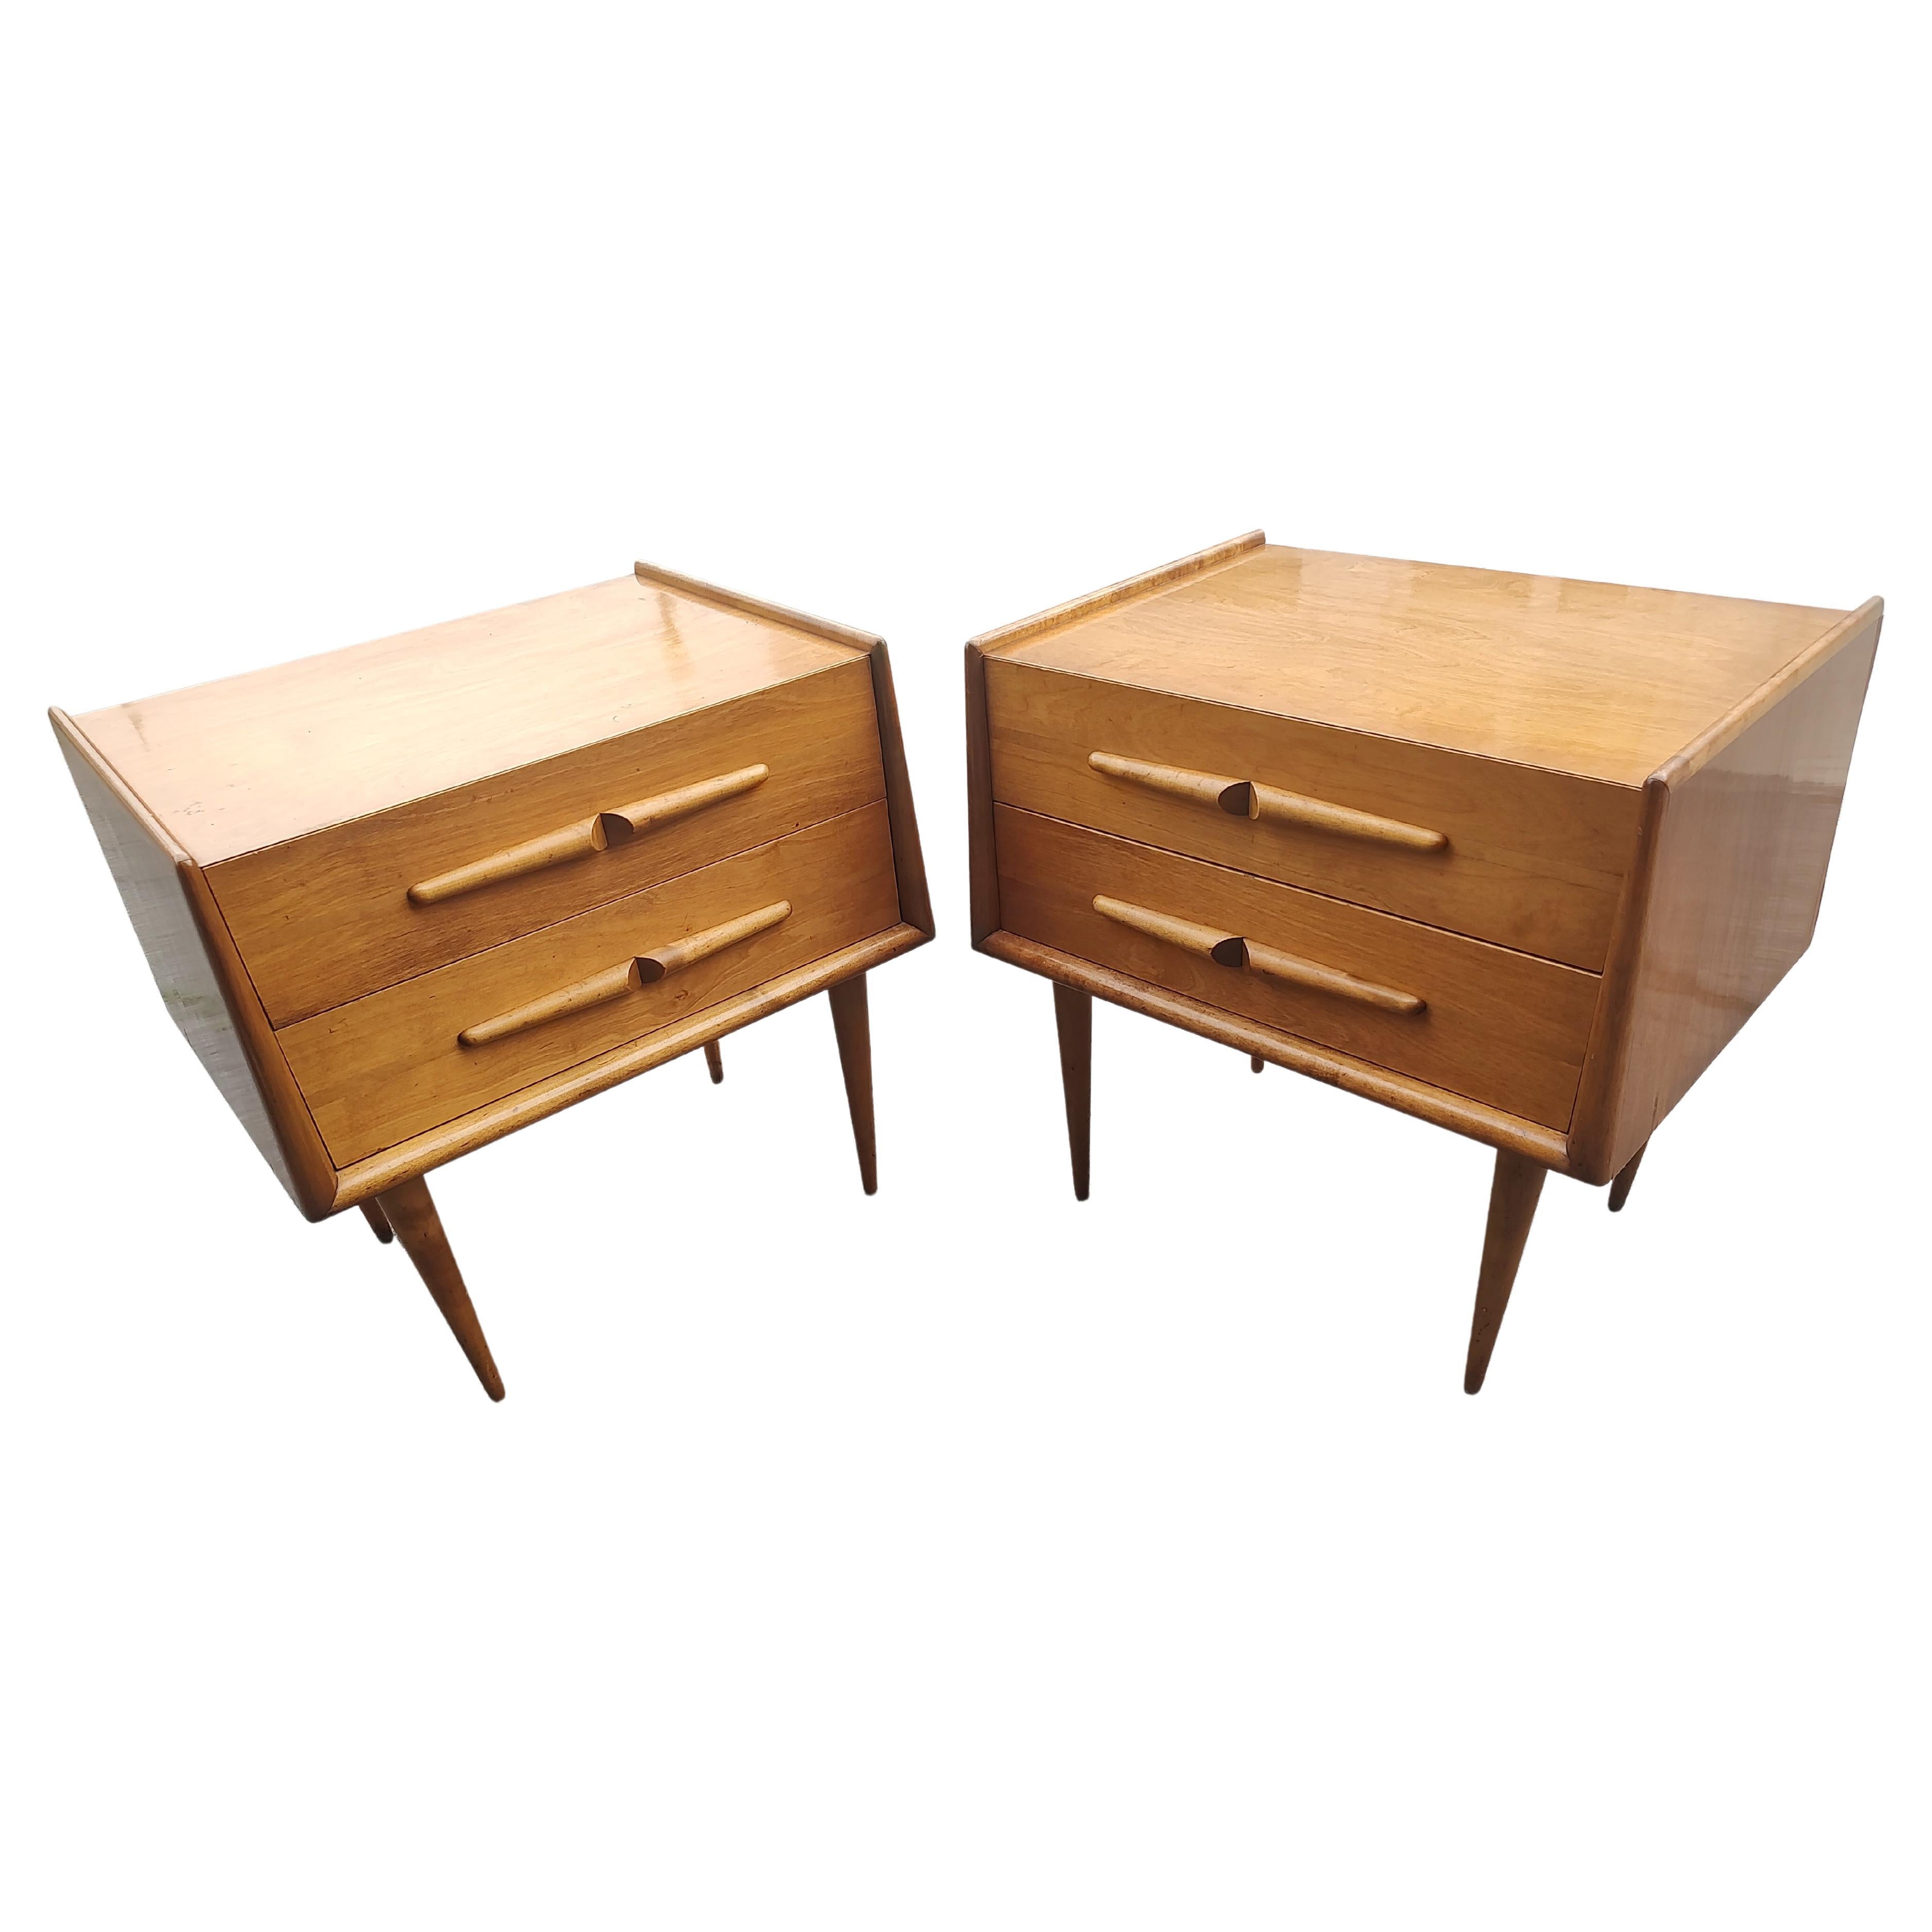 Mid-20th Century Pair of Mid Century Modern Night Stands in Birch by Edmond Spence Sweden C1953 For Sale